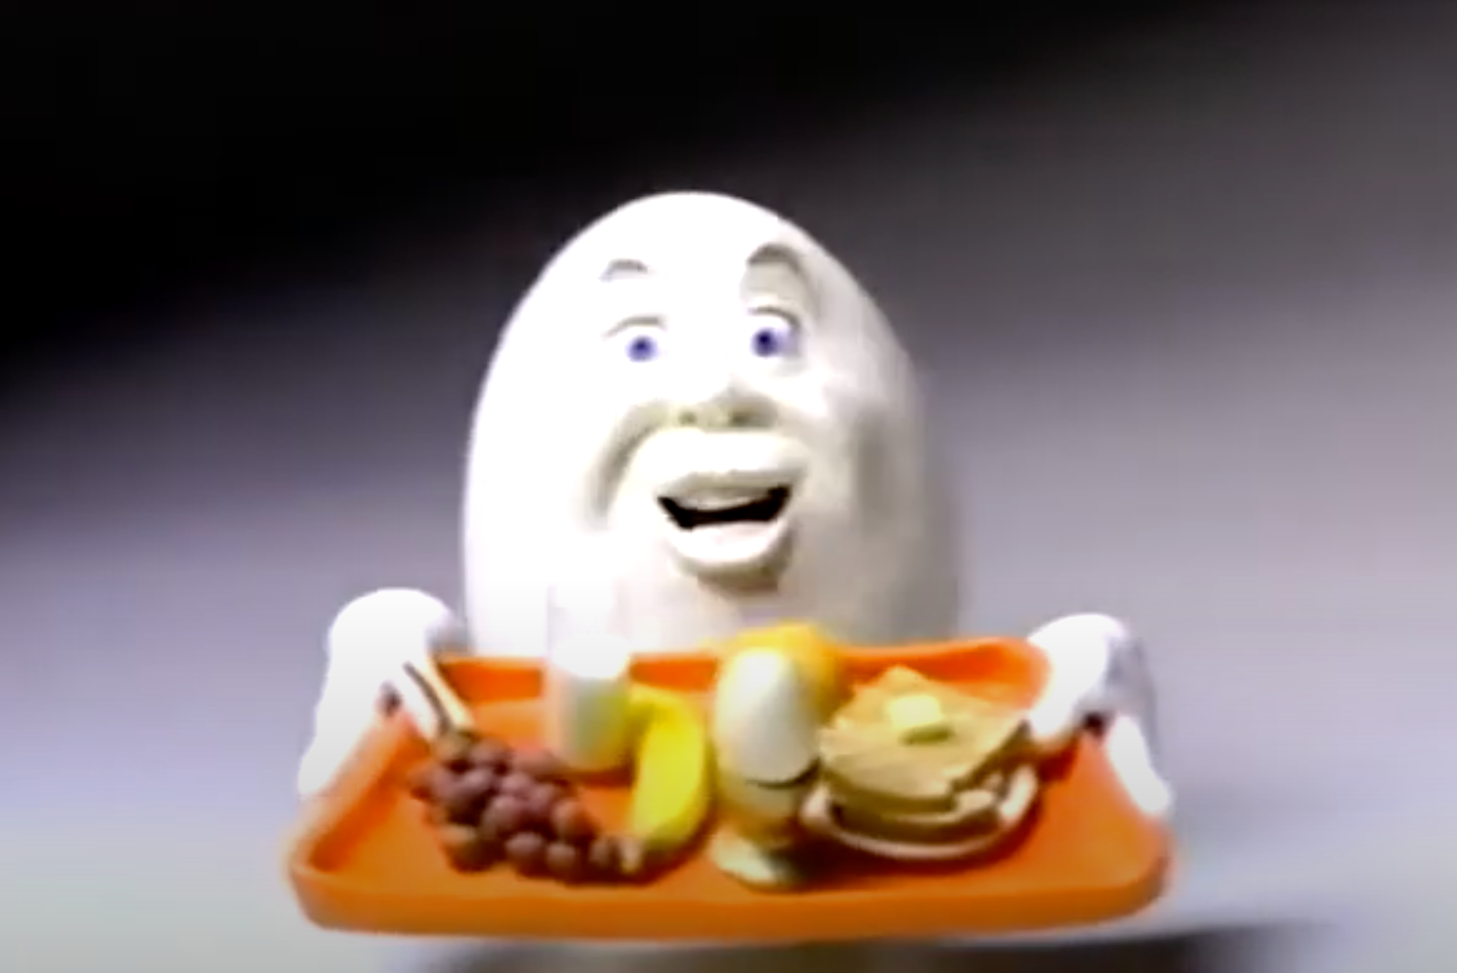 A cartoon egg holding a tray of food including an egg, toast, milk, and fruit